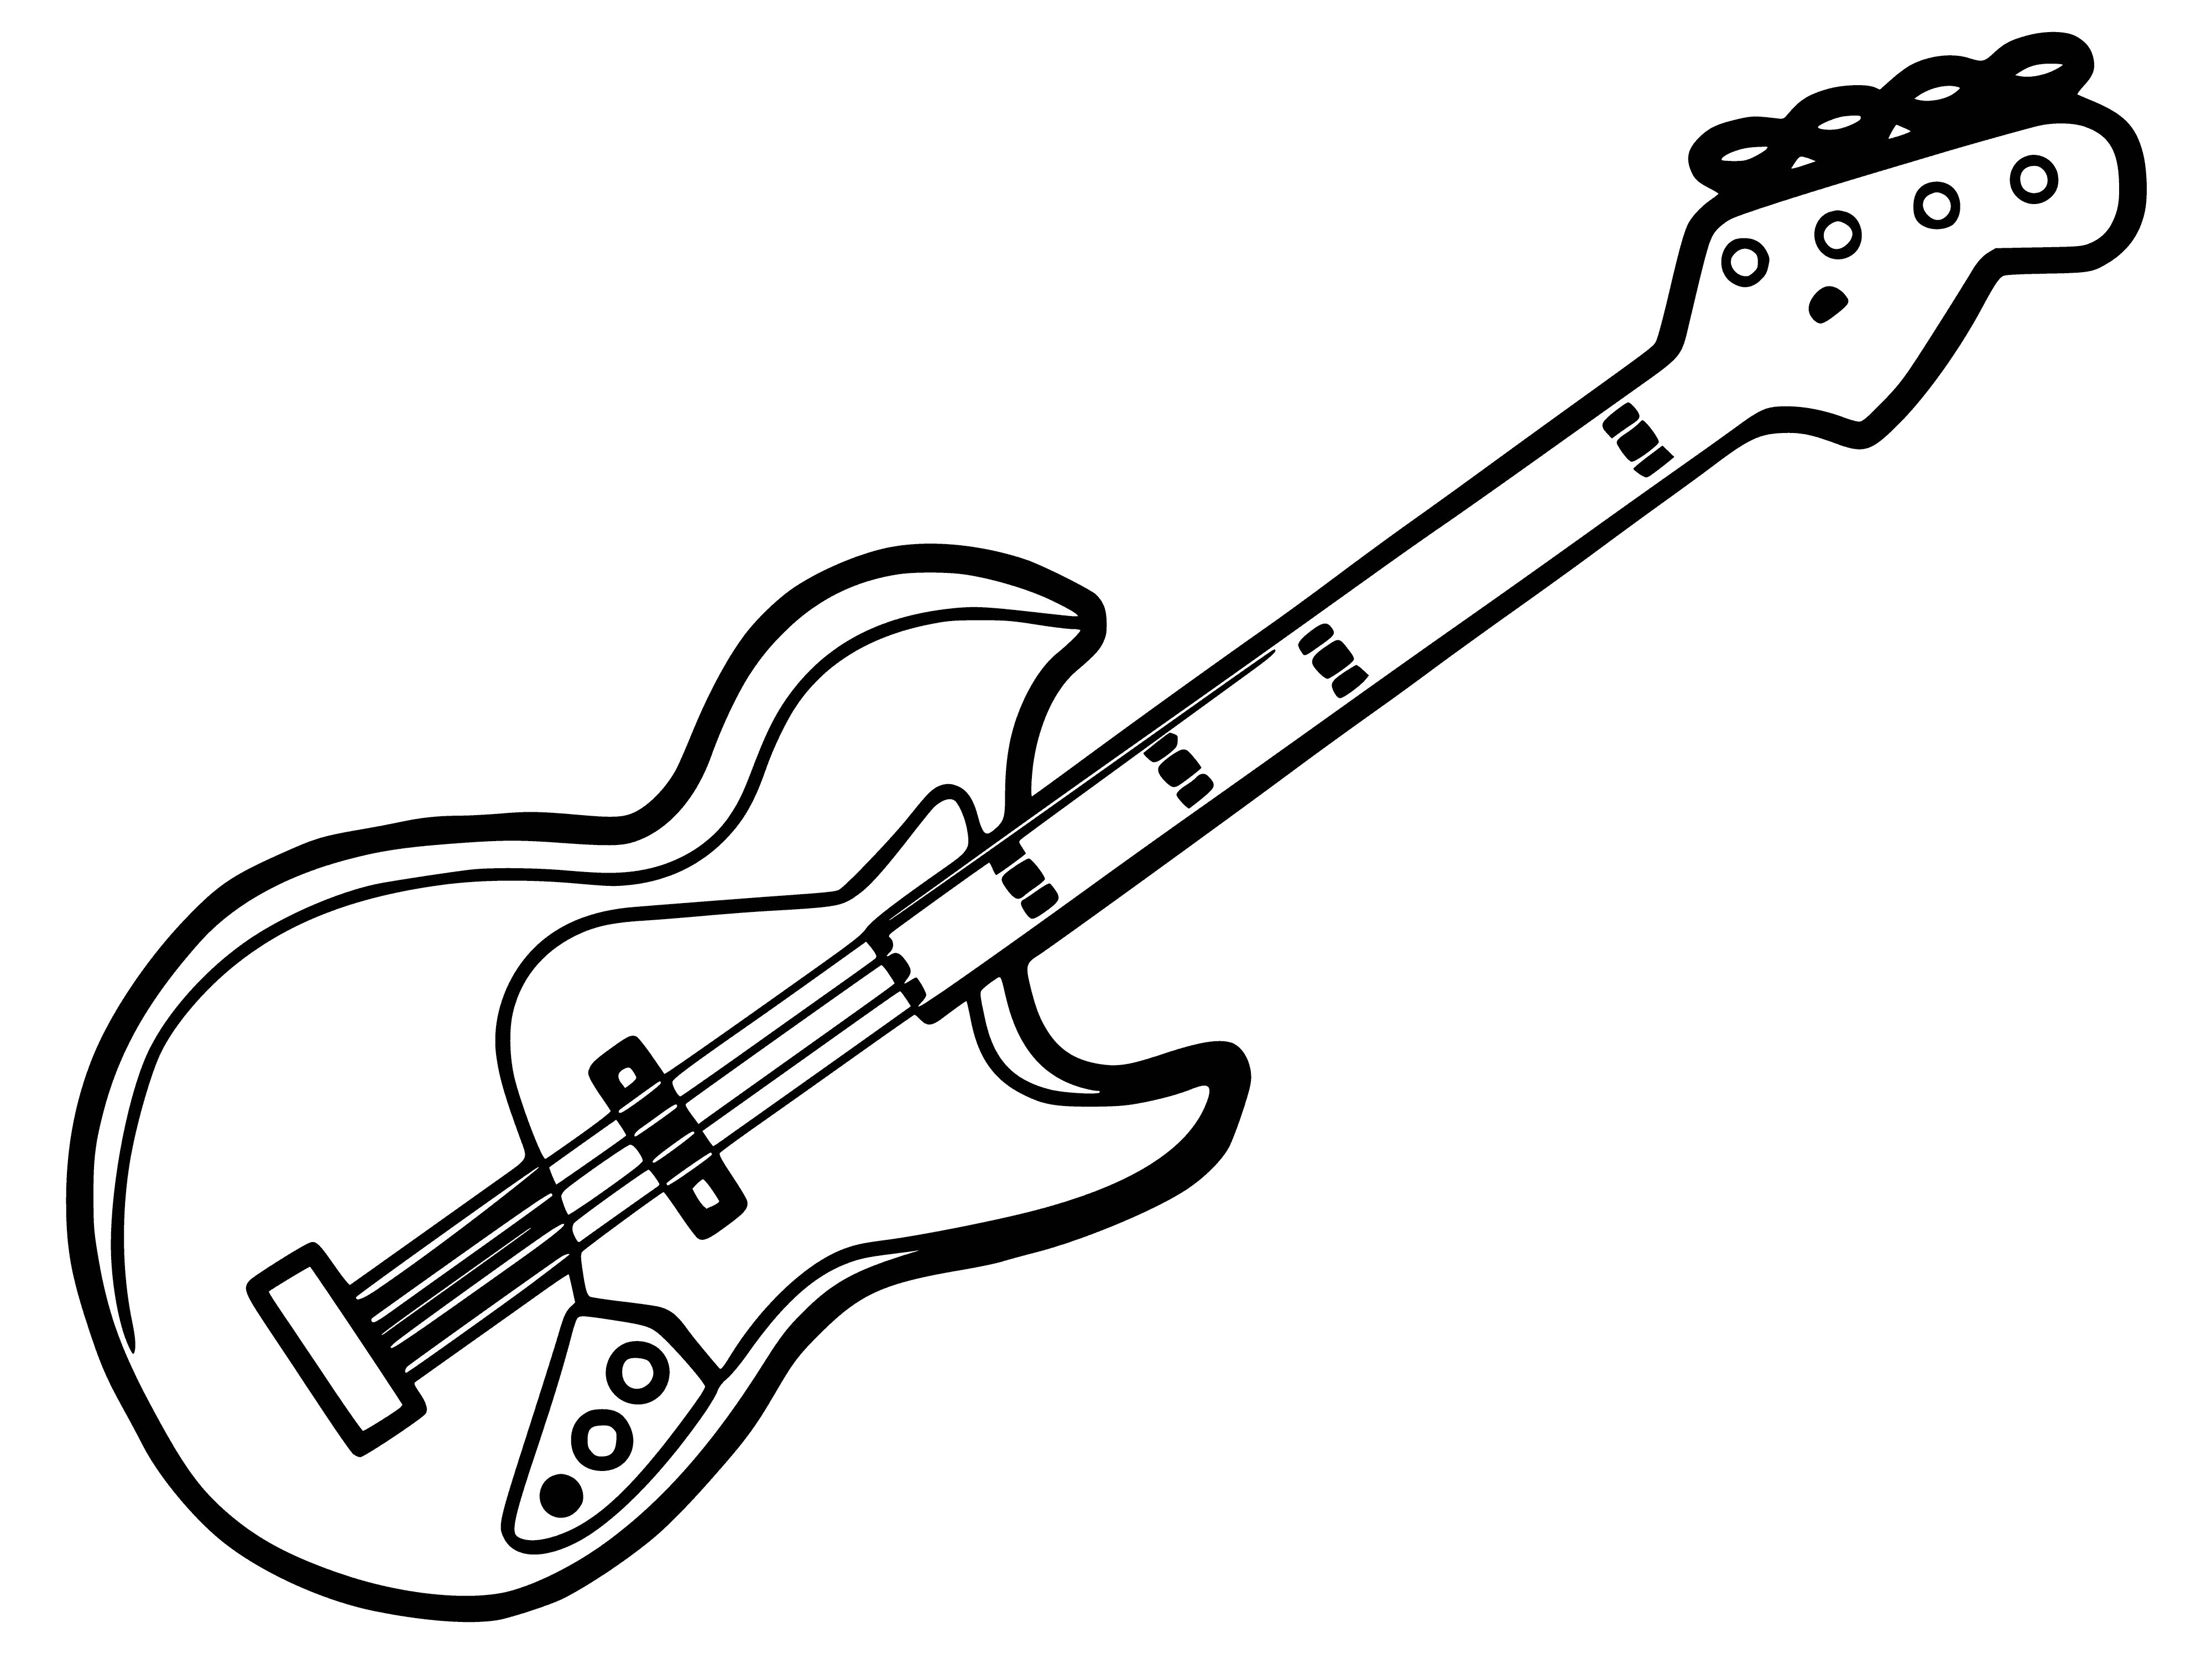 coloring page: Electric guitar converts string vibration into electrical signals, passed through amplifier & speaker creating sound waves.